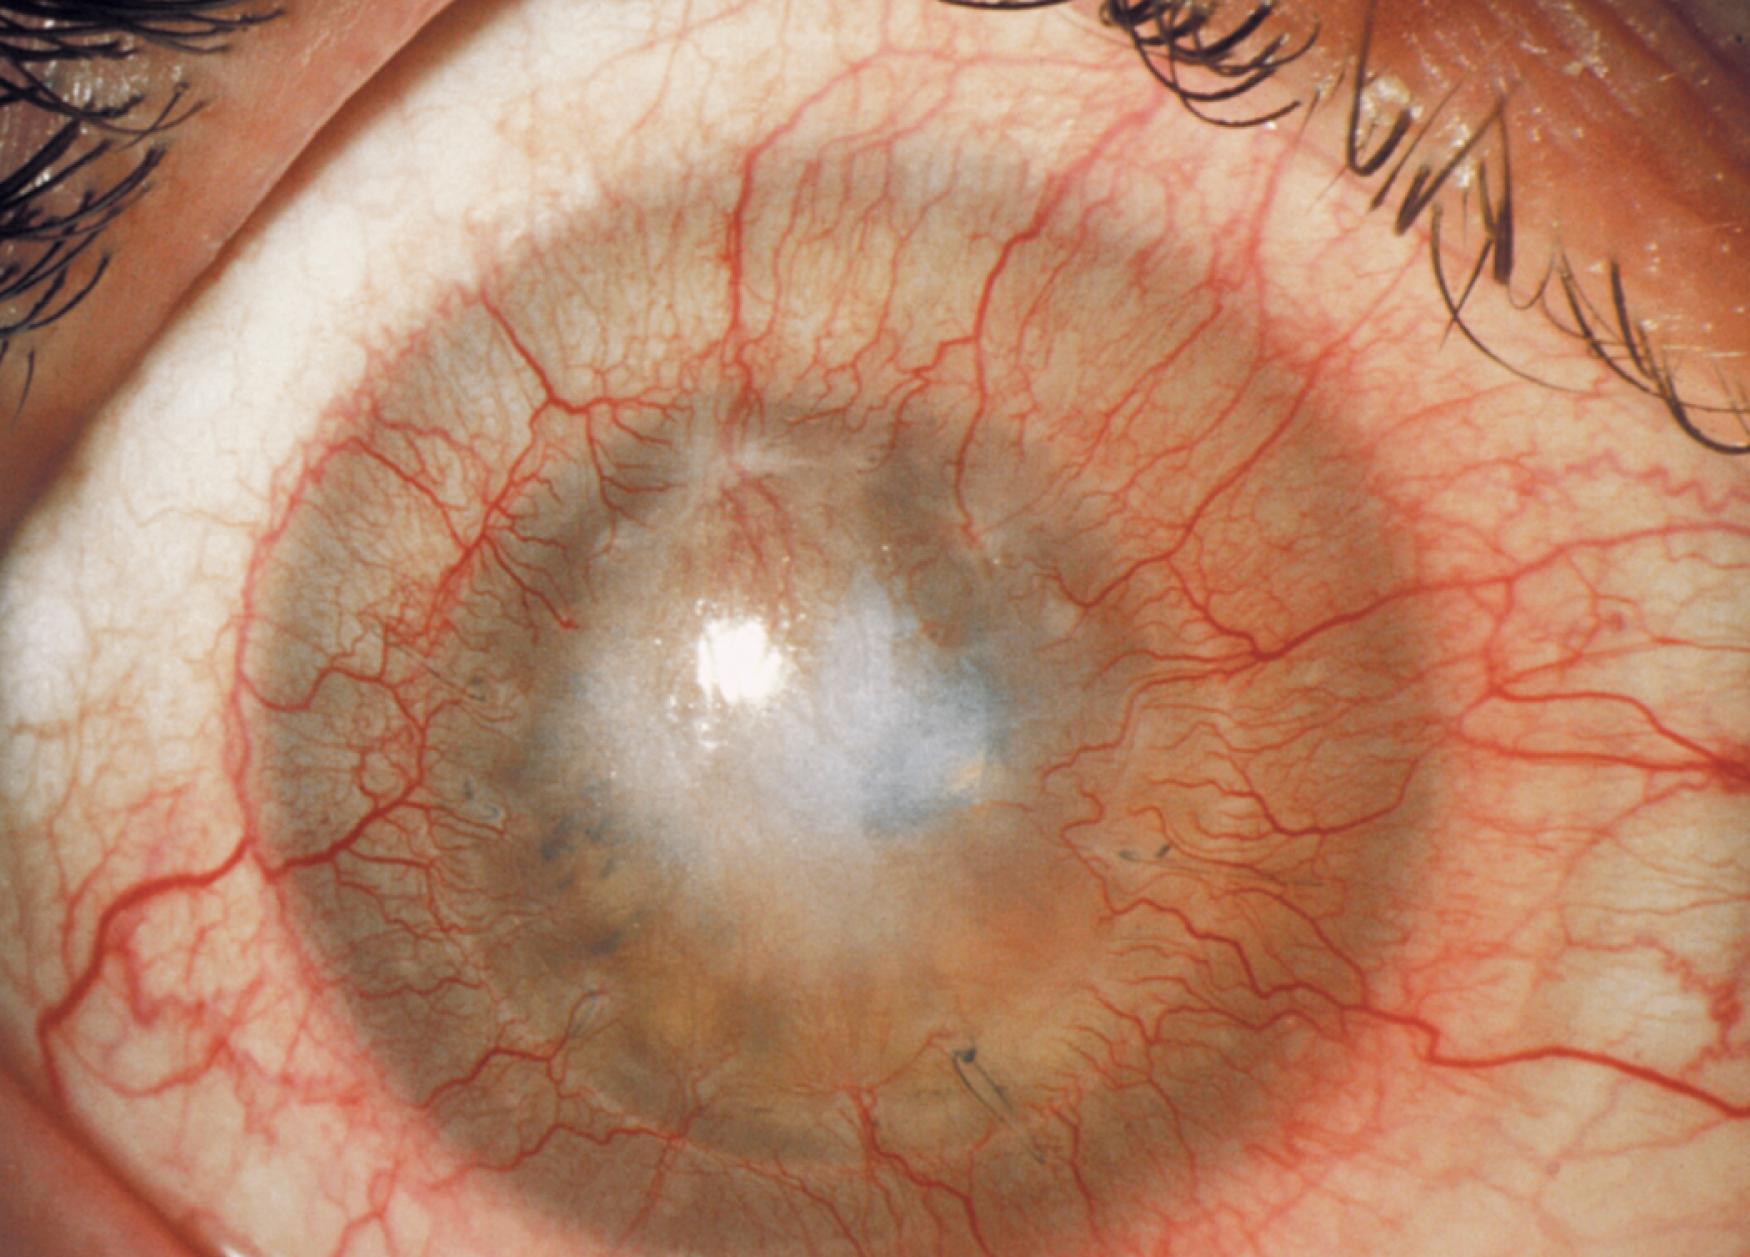 Fig. 126.4, Superficial neovascularization and stromal scarring in a penetrating keratoplasty that failed owing to recurrent surface disease from alkali injury (limbal stem cell deficiency).